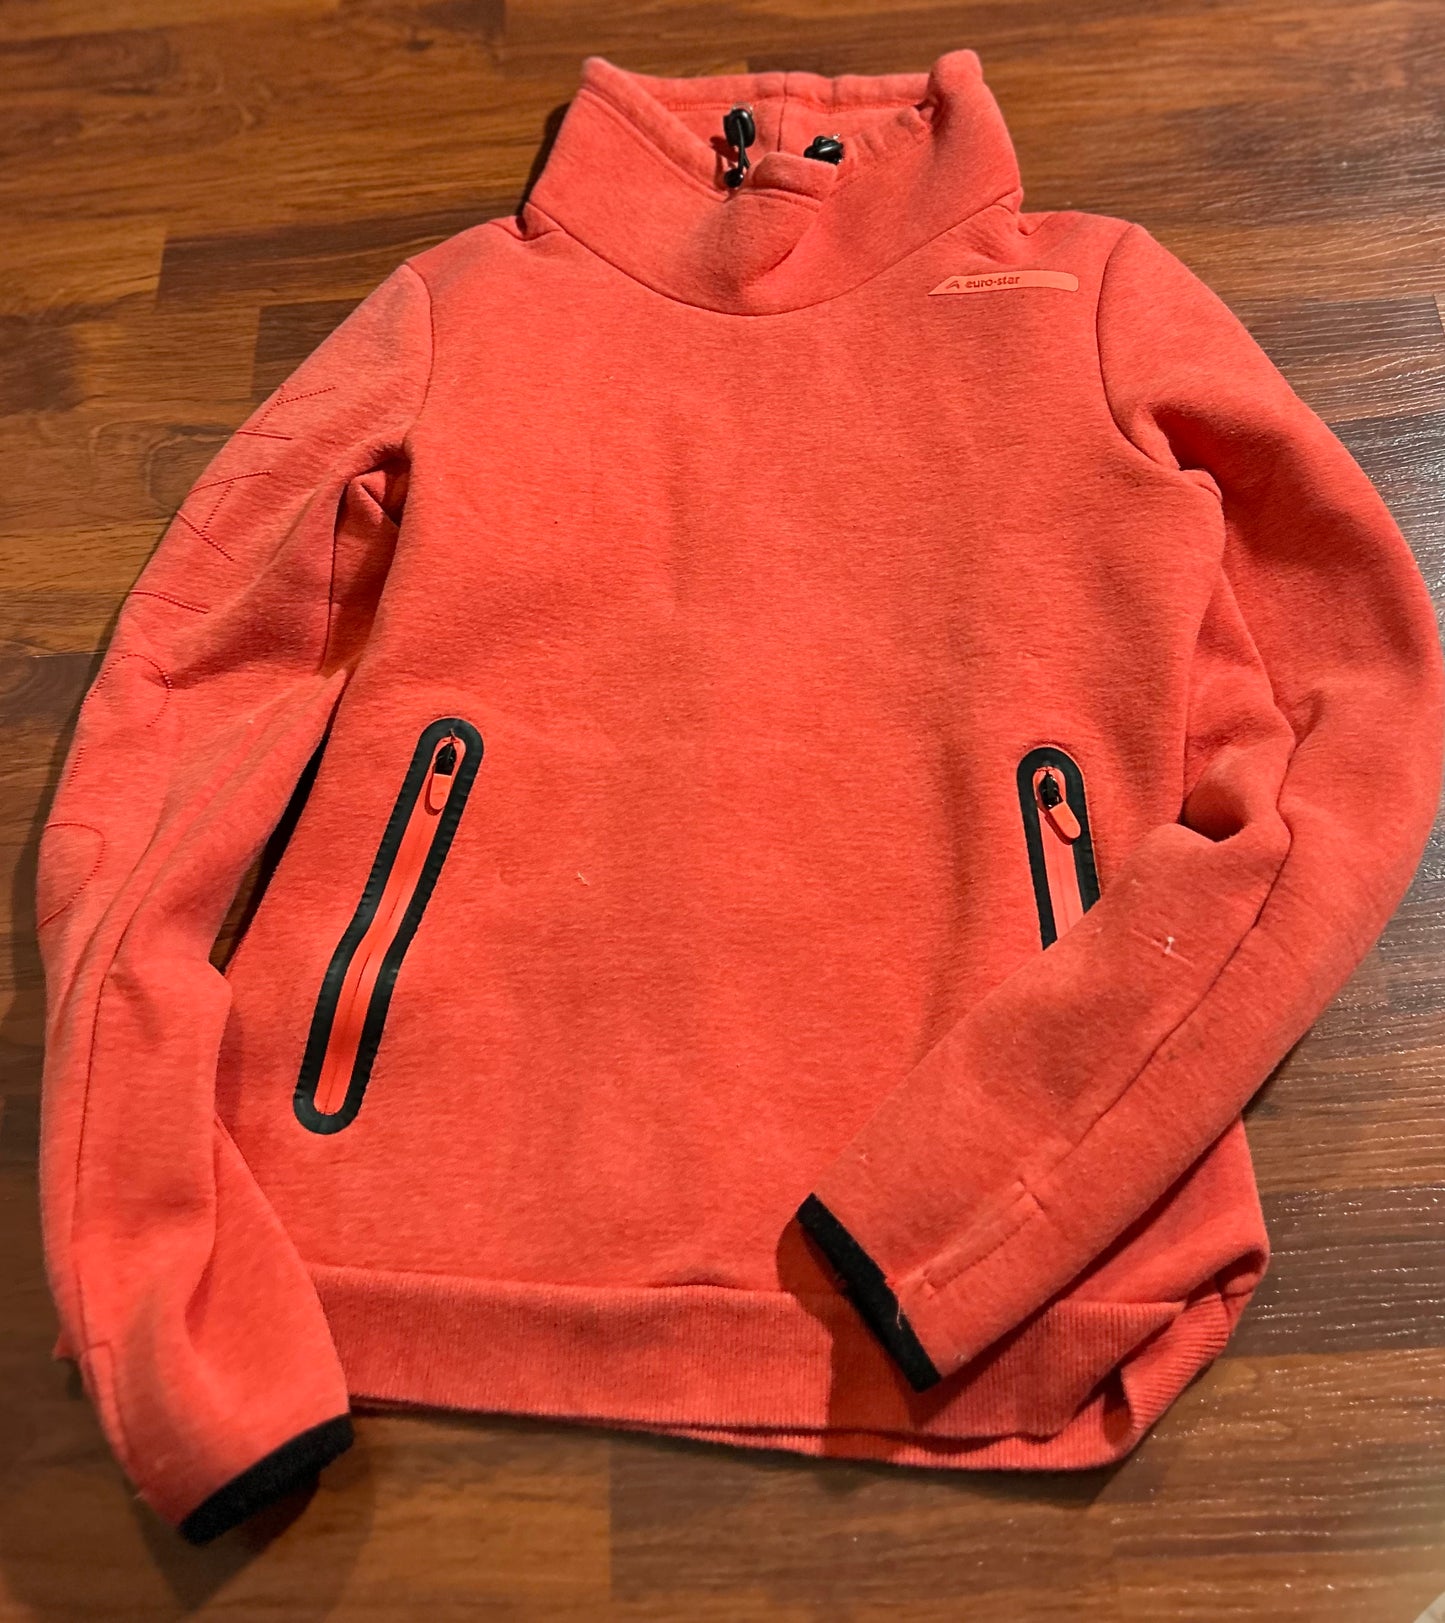 Small Euro Star red sweater